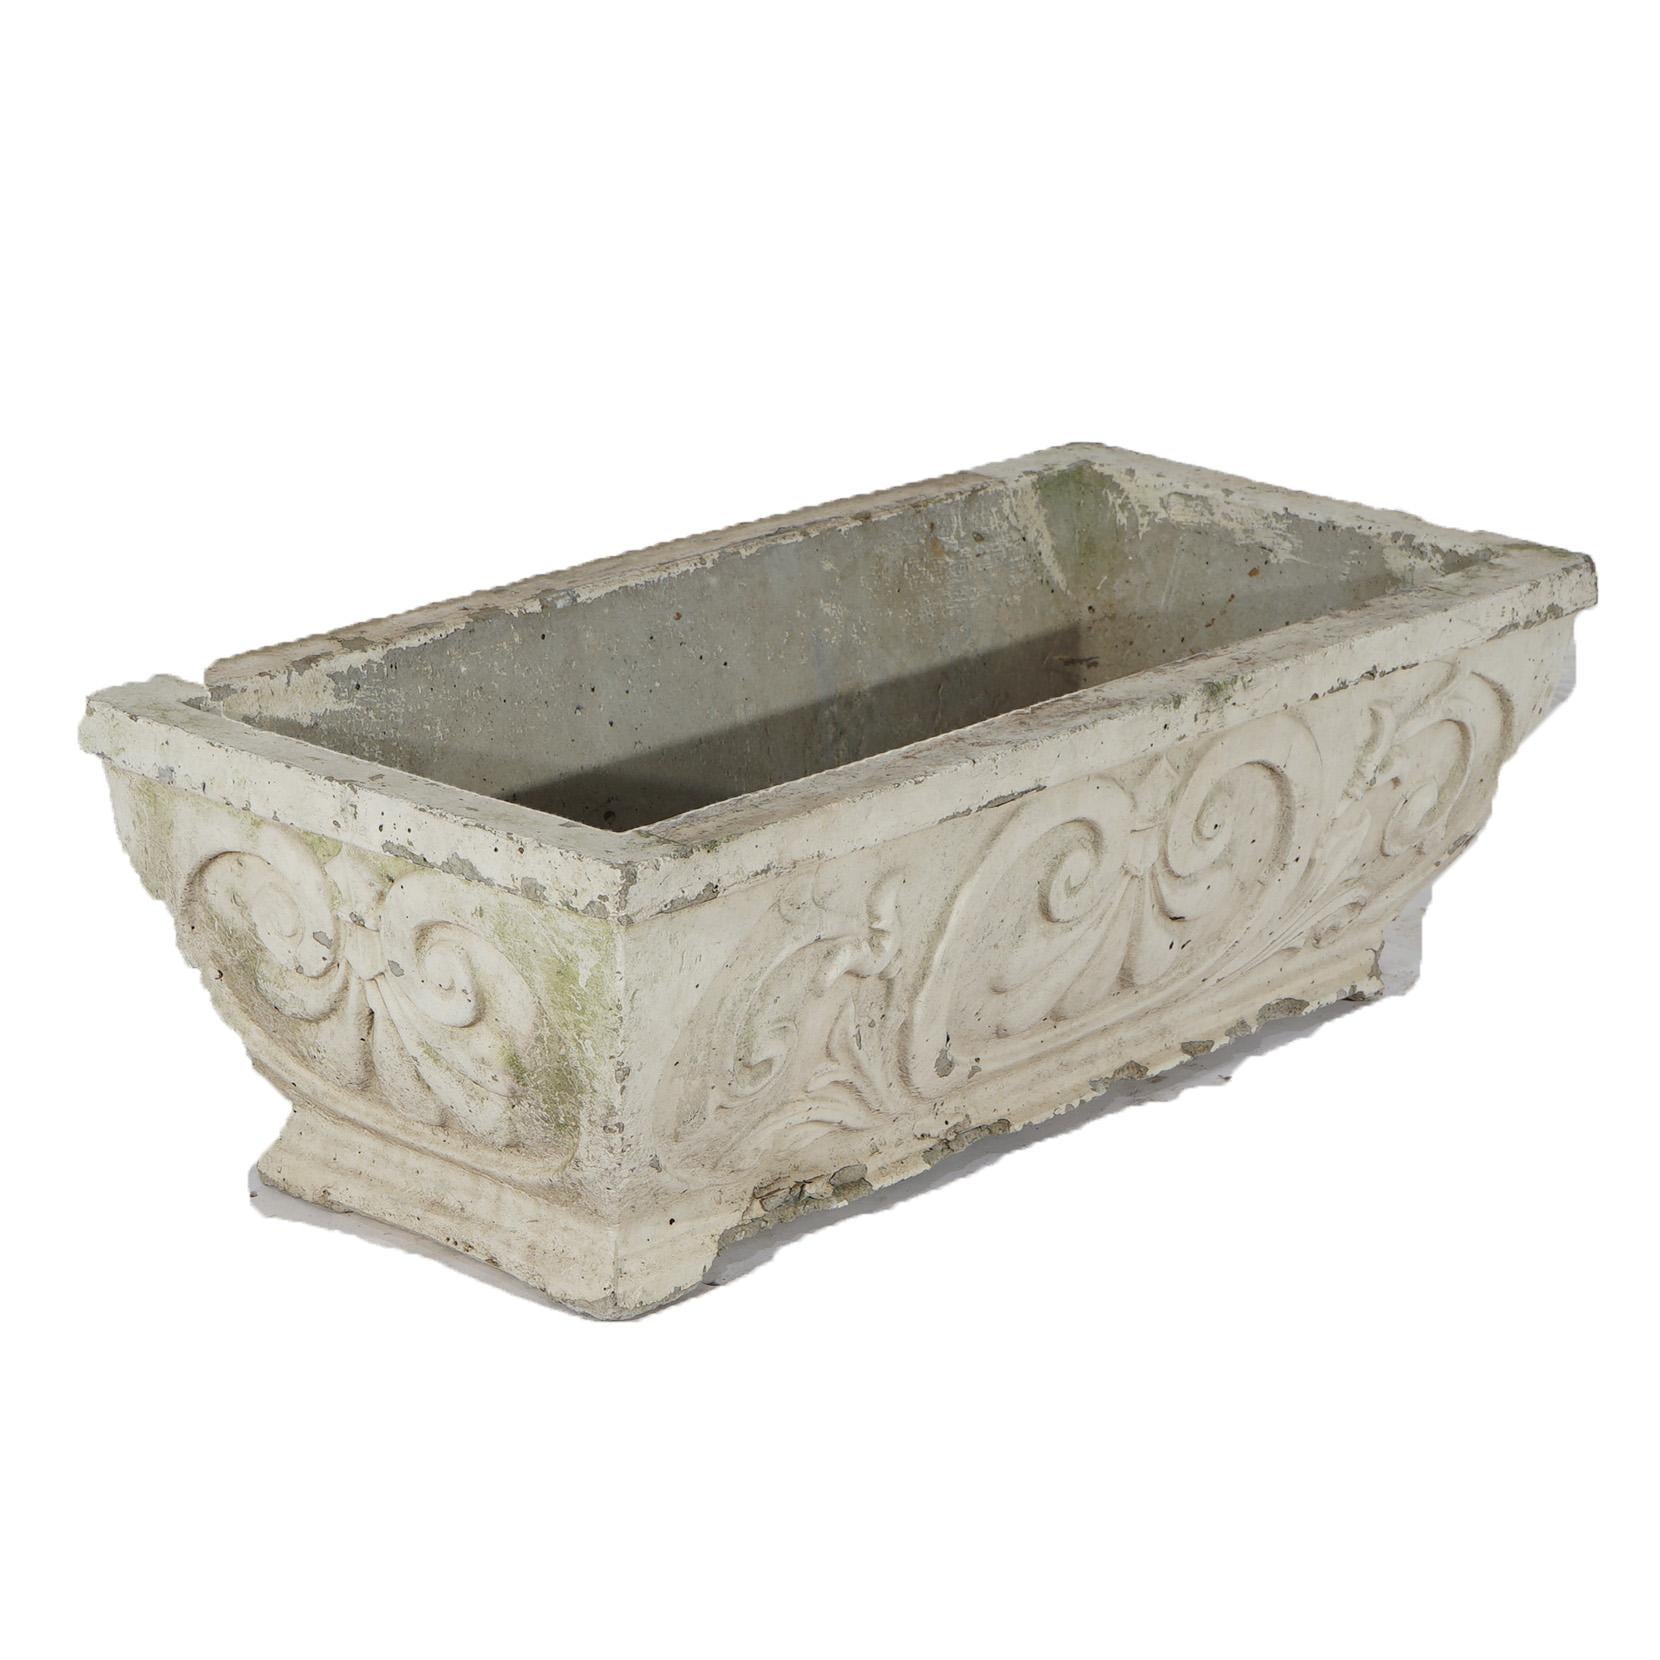 Cast Hardstone Long Garden or Patio Planter with Scroll Work in Relief 20th C In Good Condition For Sale In Big Flats, NY